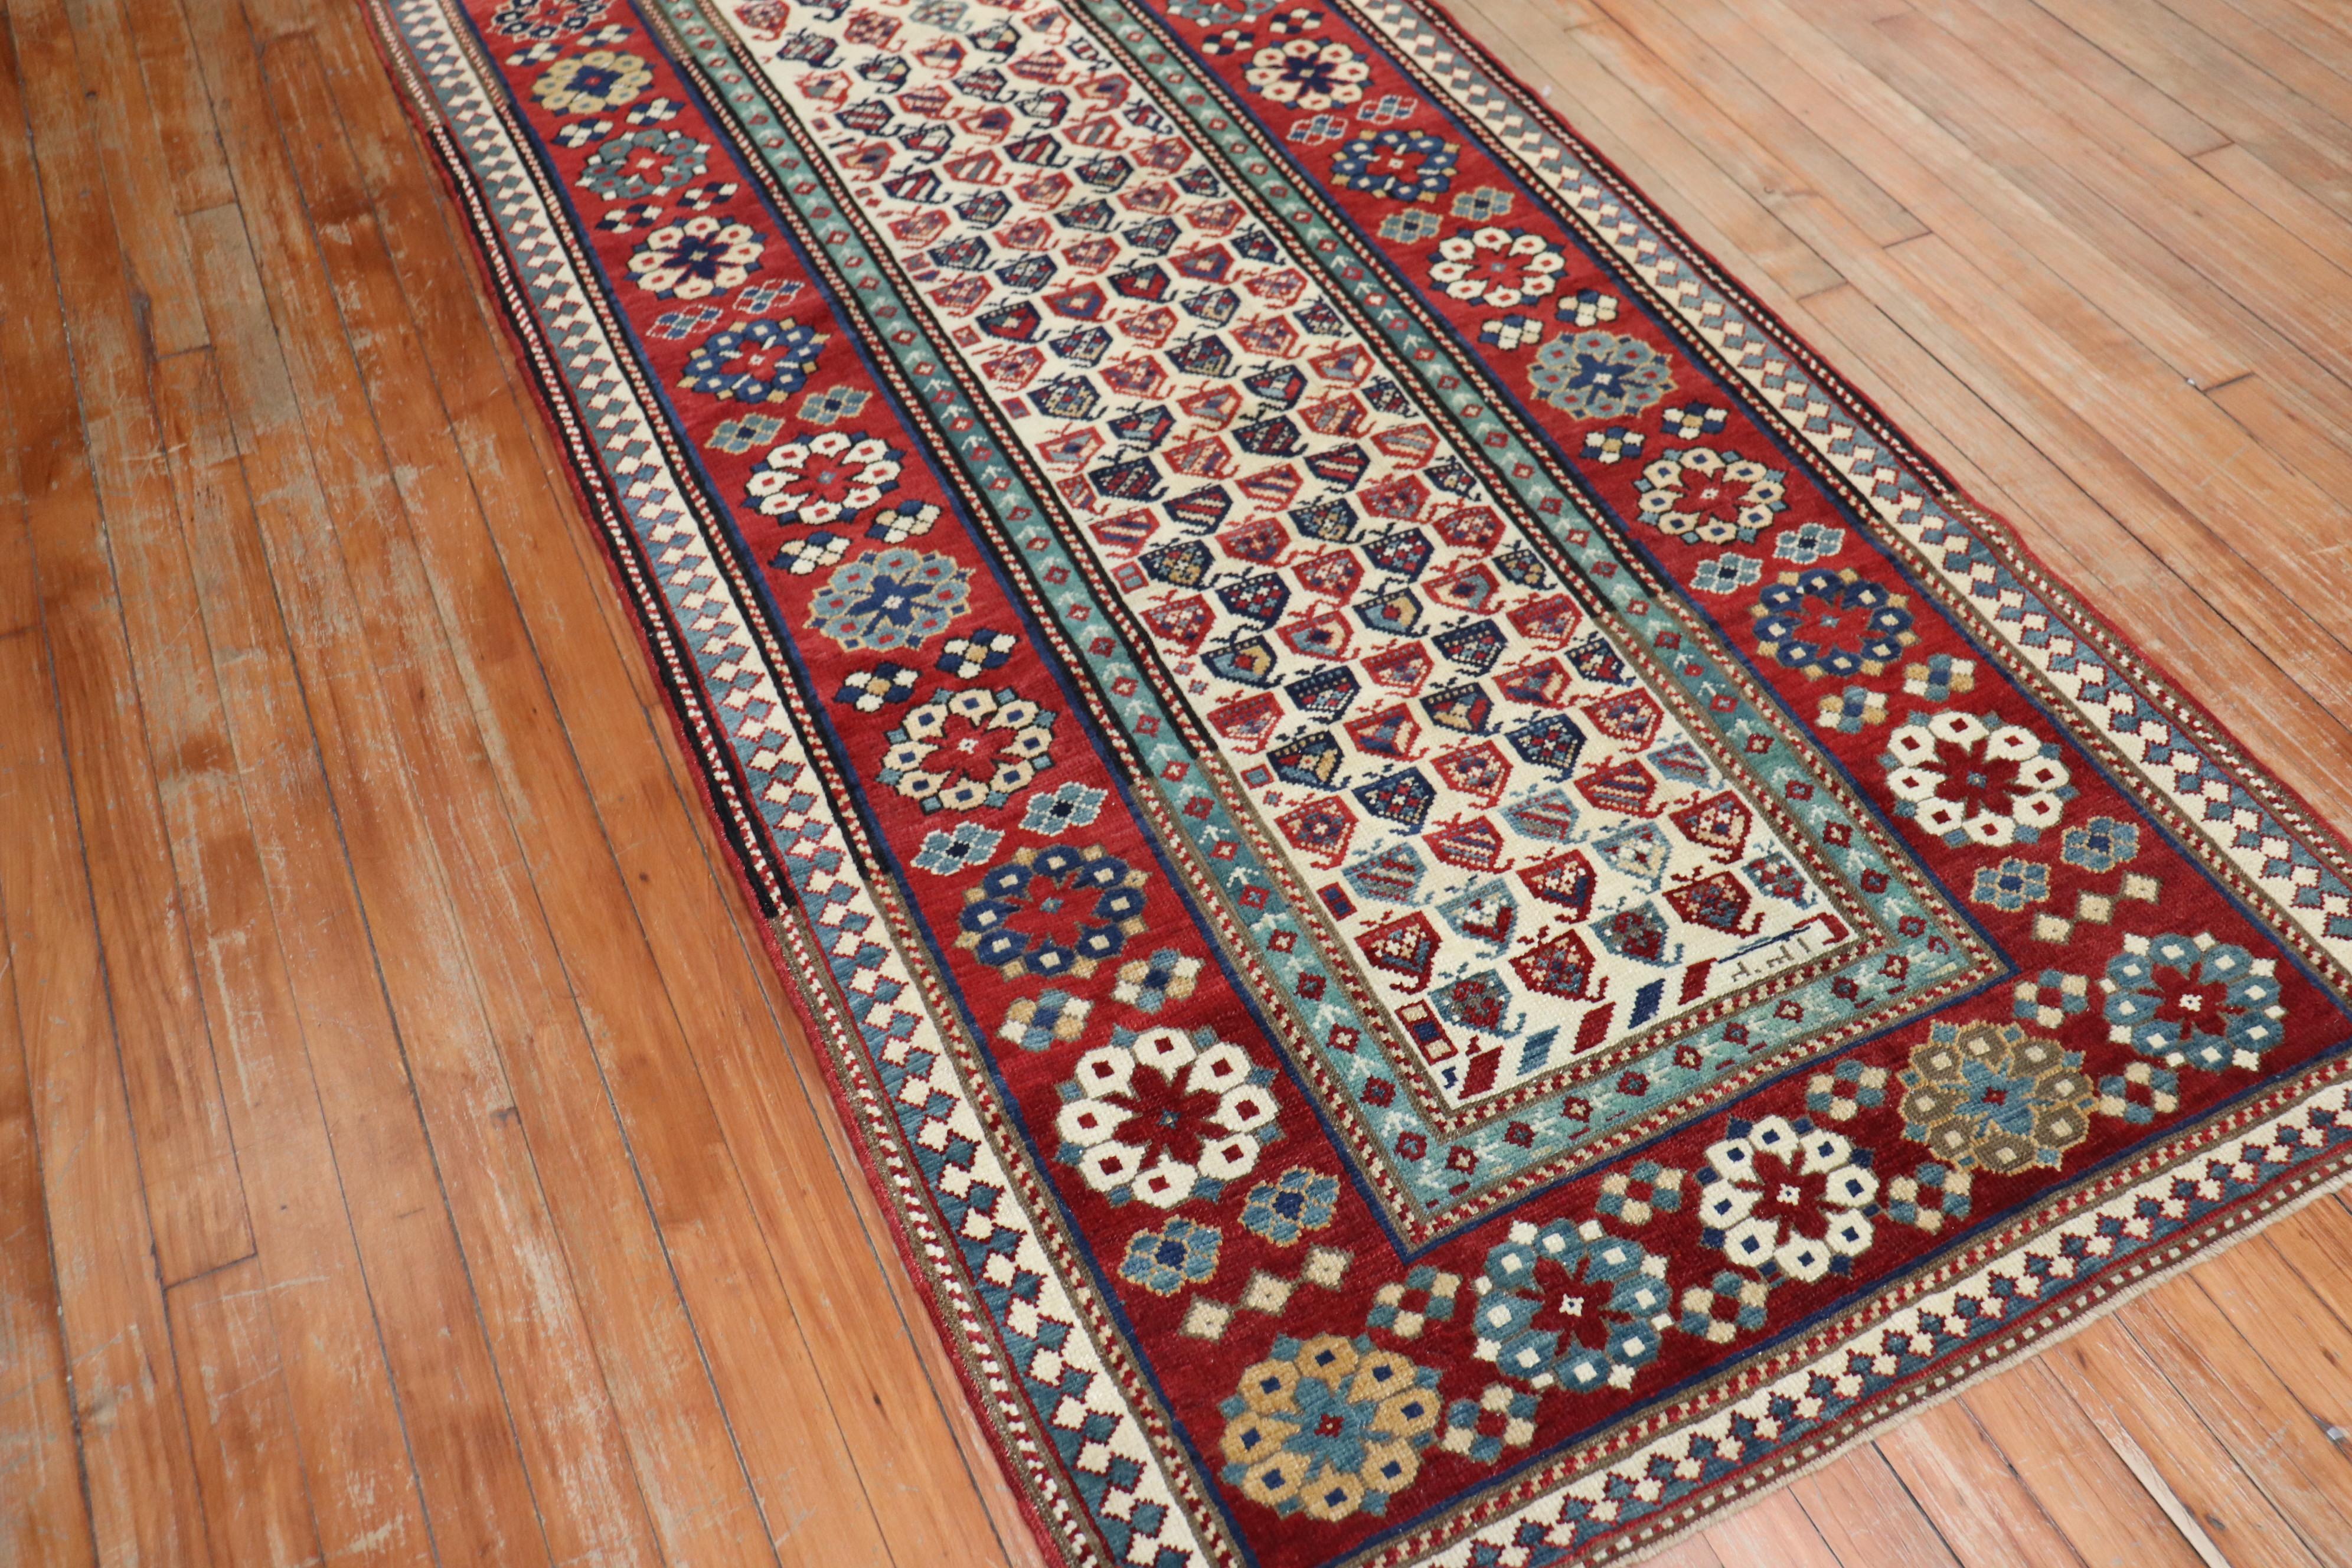 A late 19th-century Caucasian Tribal Talish Runner

Measures: 3'3